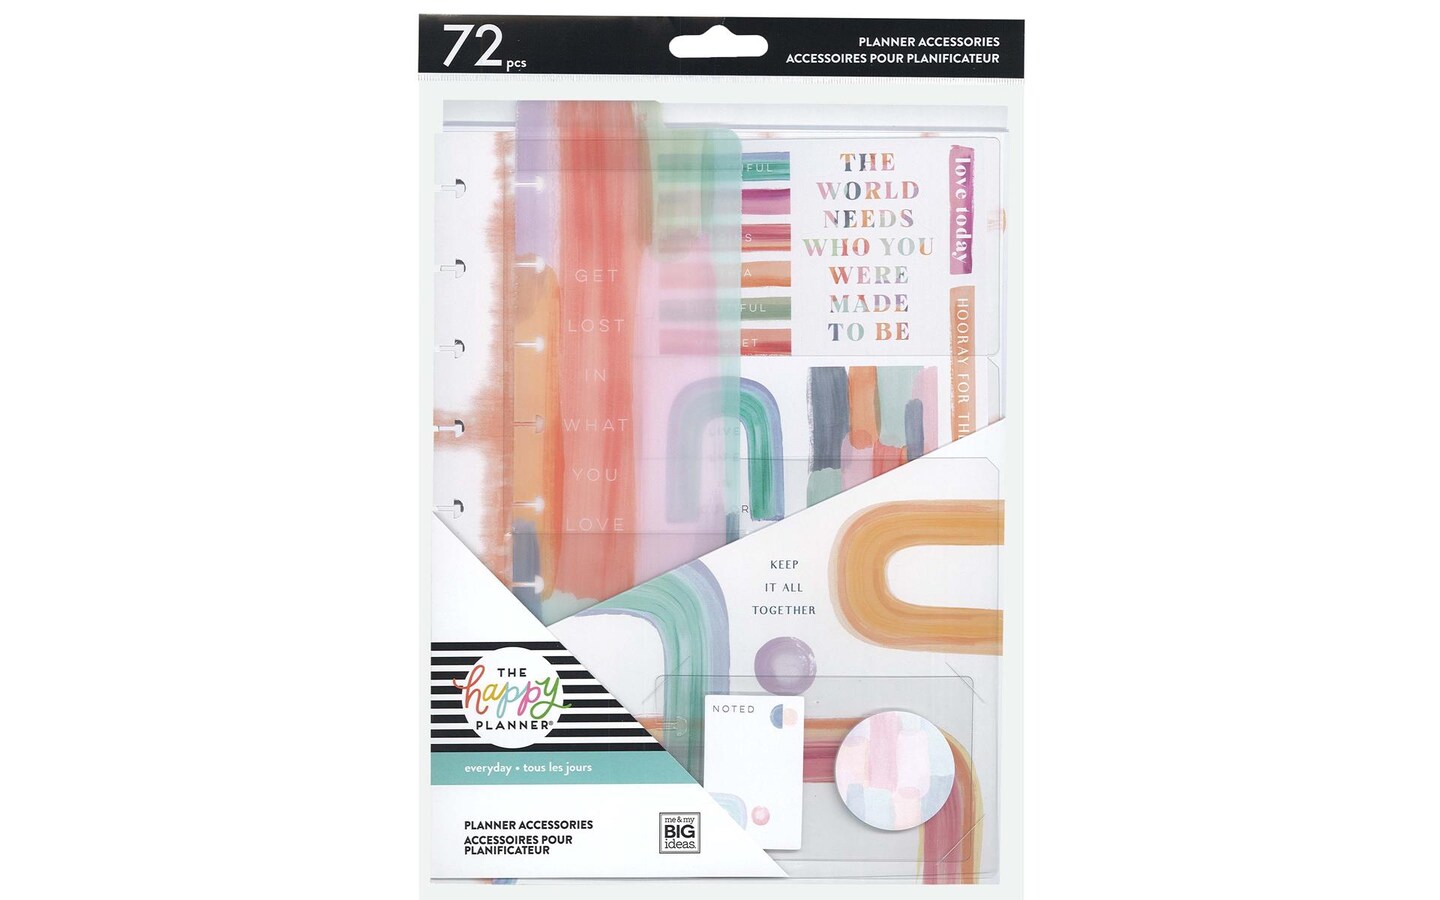 Planner Accessory Pack - BIG